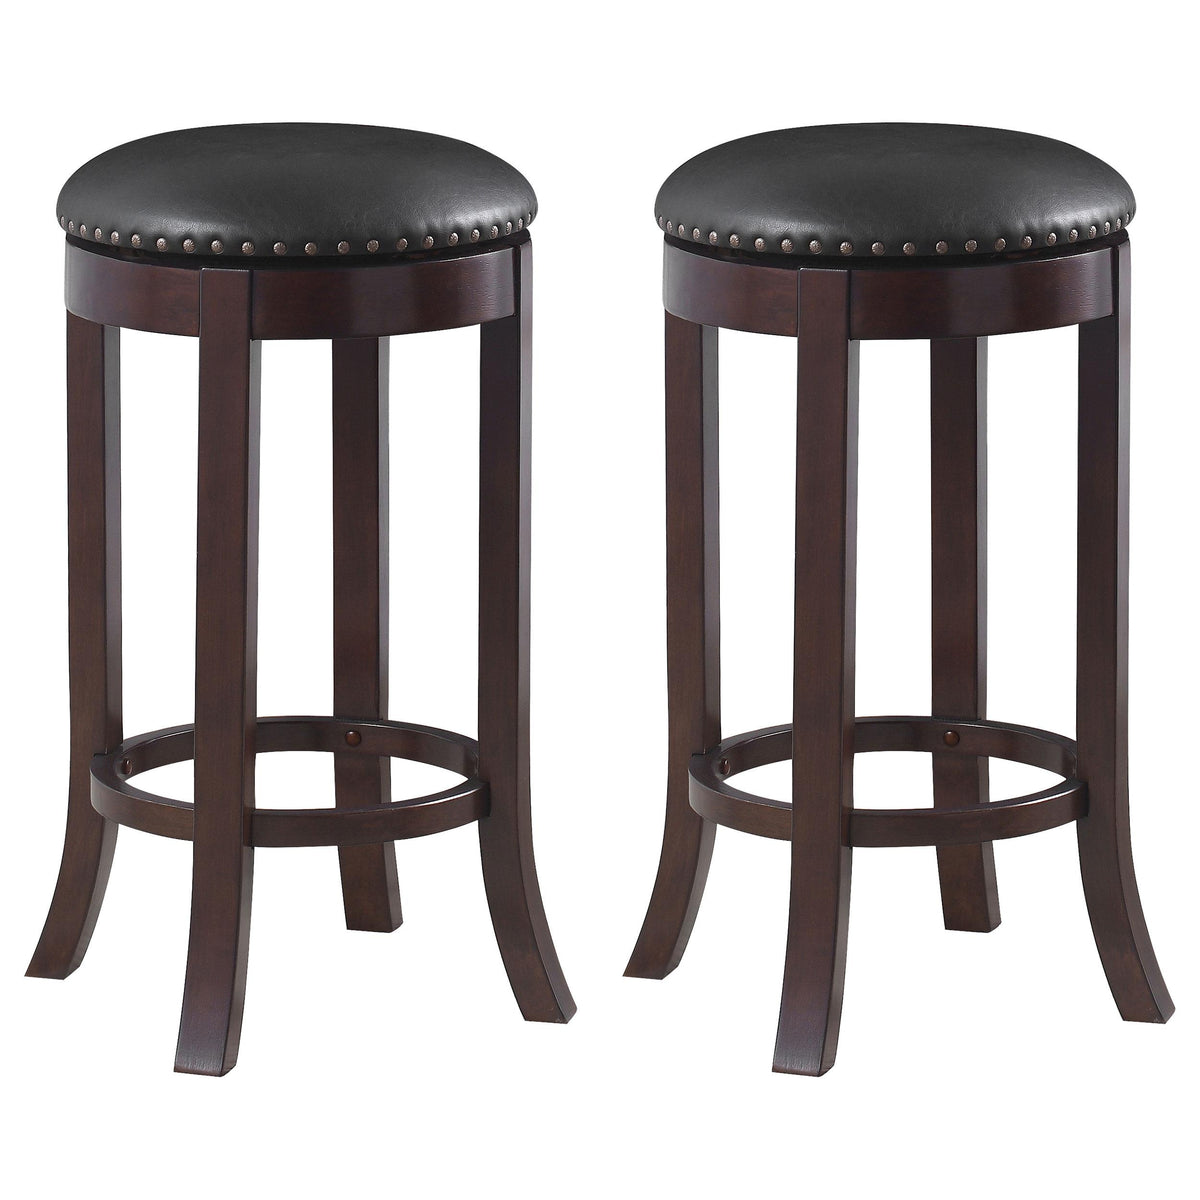 Aboushi Swivel Bar Stools with Upholstered Seat Brown (Set of 2)  Las Vegas Furniture Stores